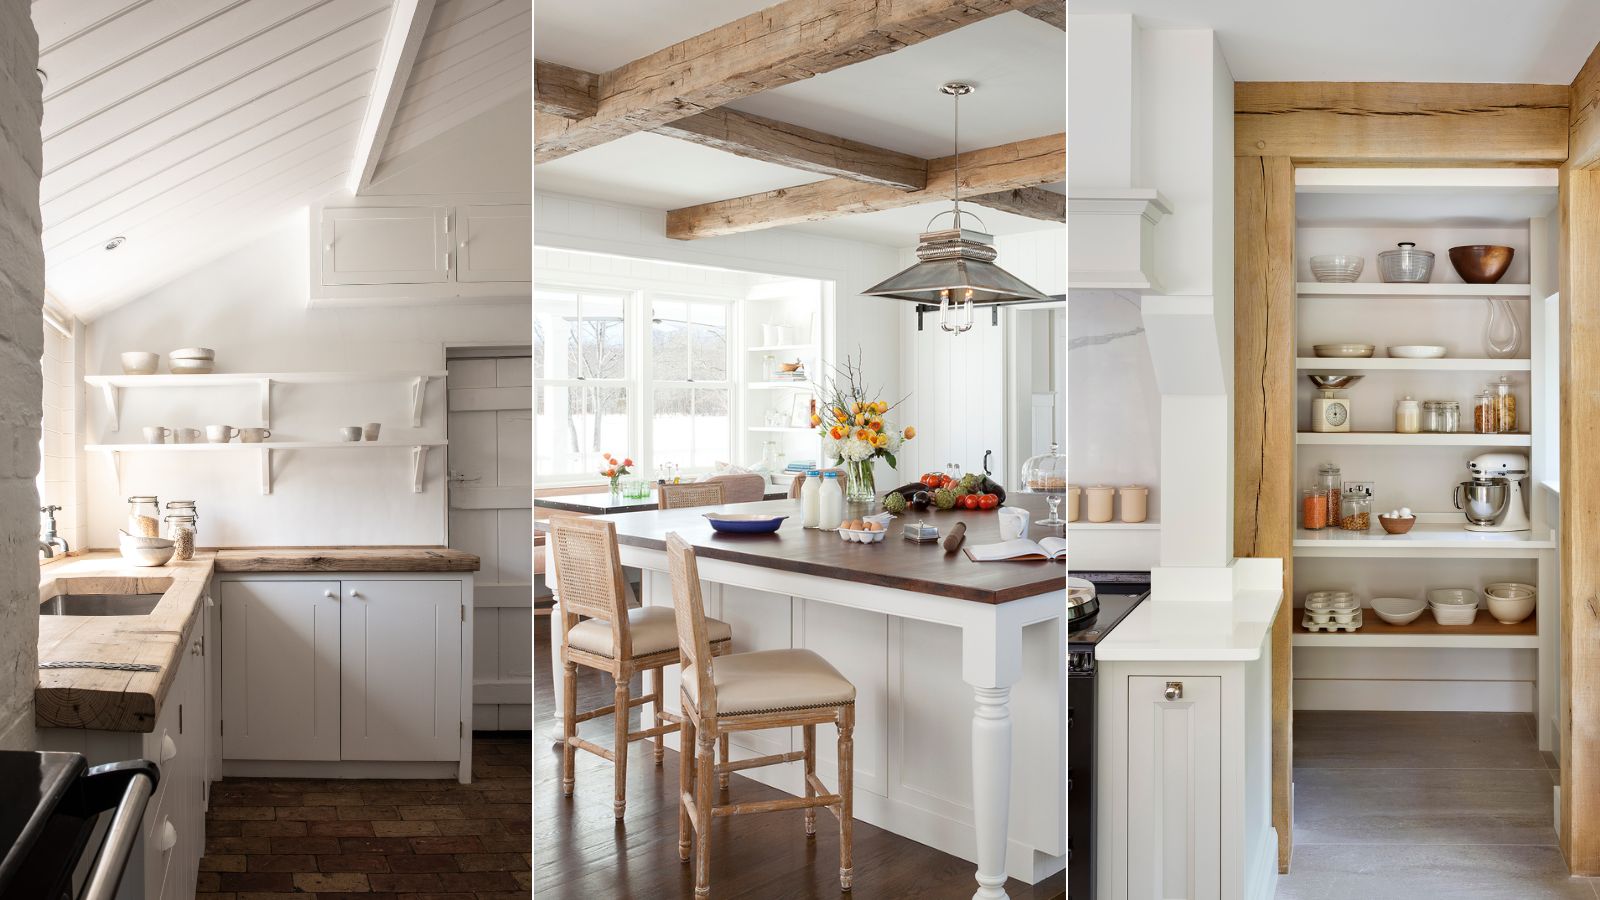 42 Colorful Kitchens That Are Anything But Neutral